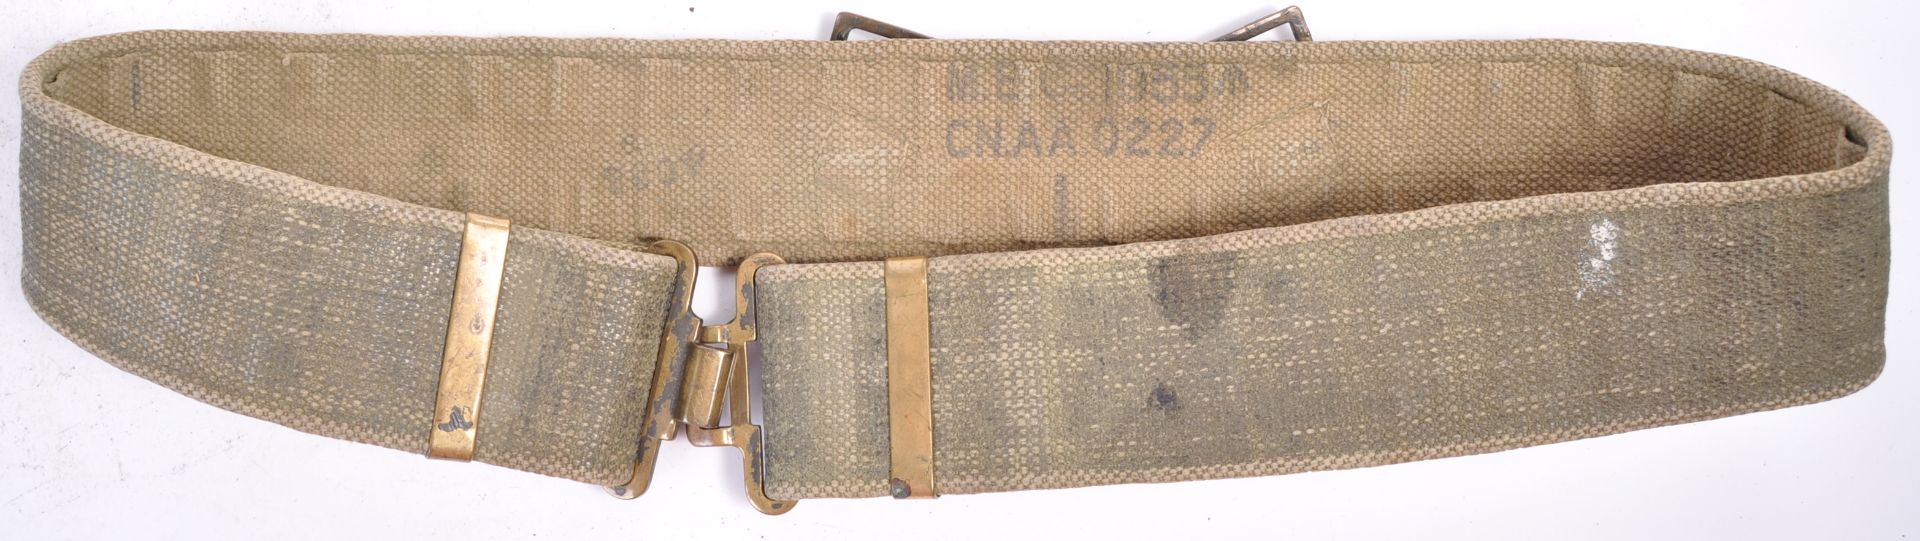 COLLECTION OF BRITISH SECOND WORLD WAR RELATED ITEMS - Image 4 of 9